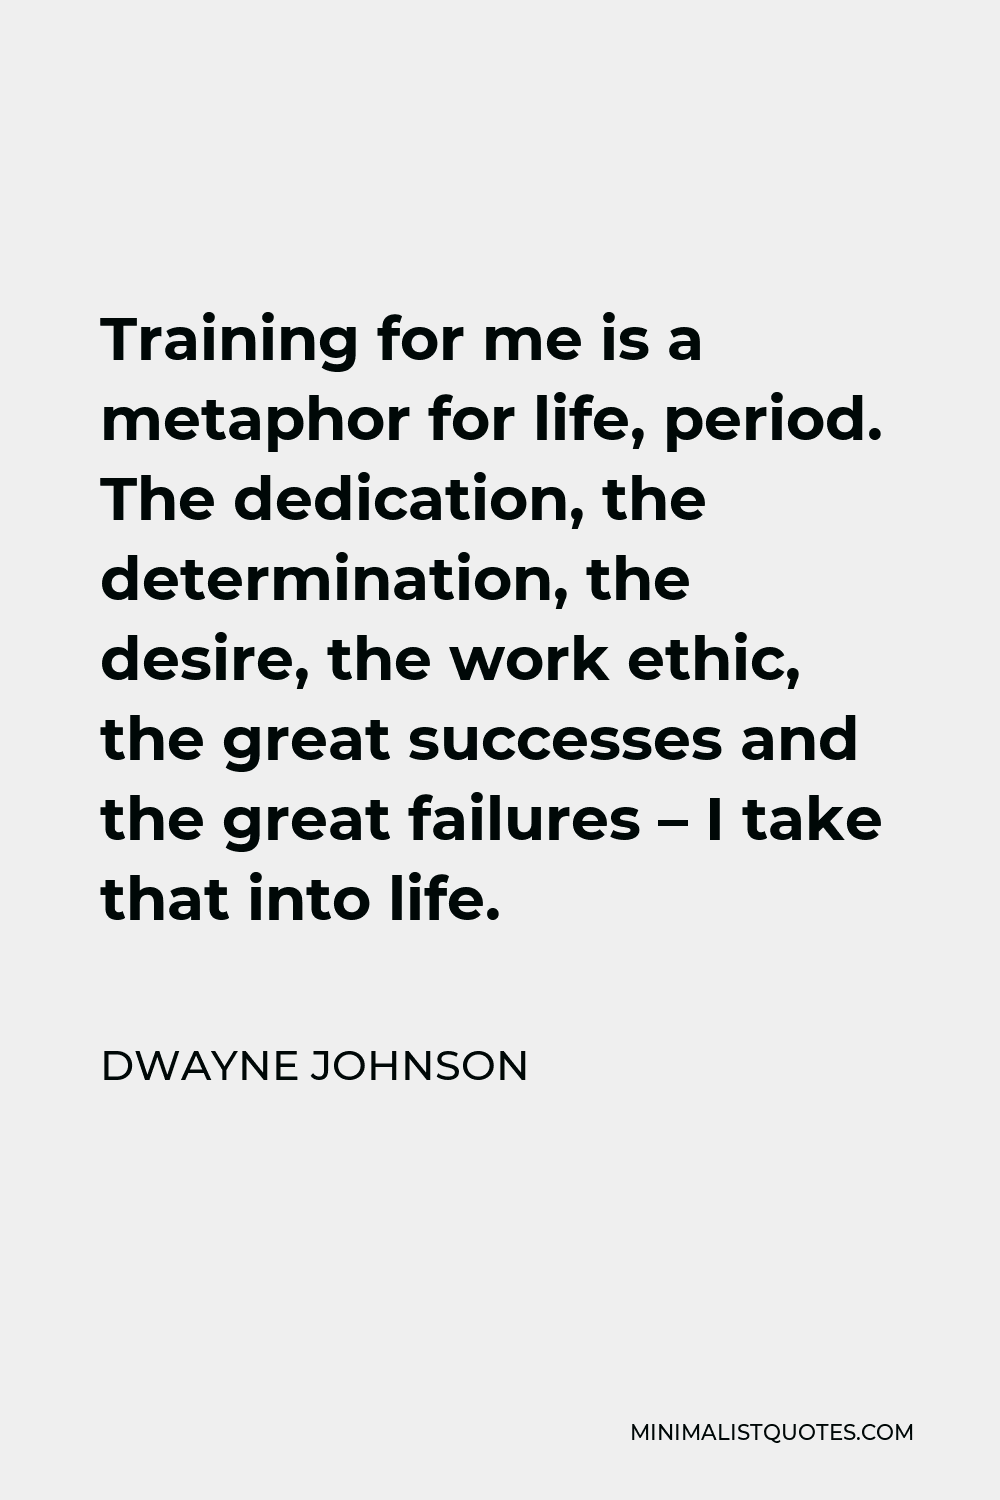 Dwayne Johnson Quote - Training for me is a metaphor for life, period. The dedication, the determination, the desire, the work ethic, the great successes and the great failures – I take that into life.